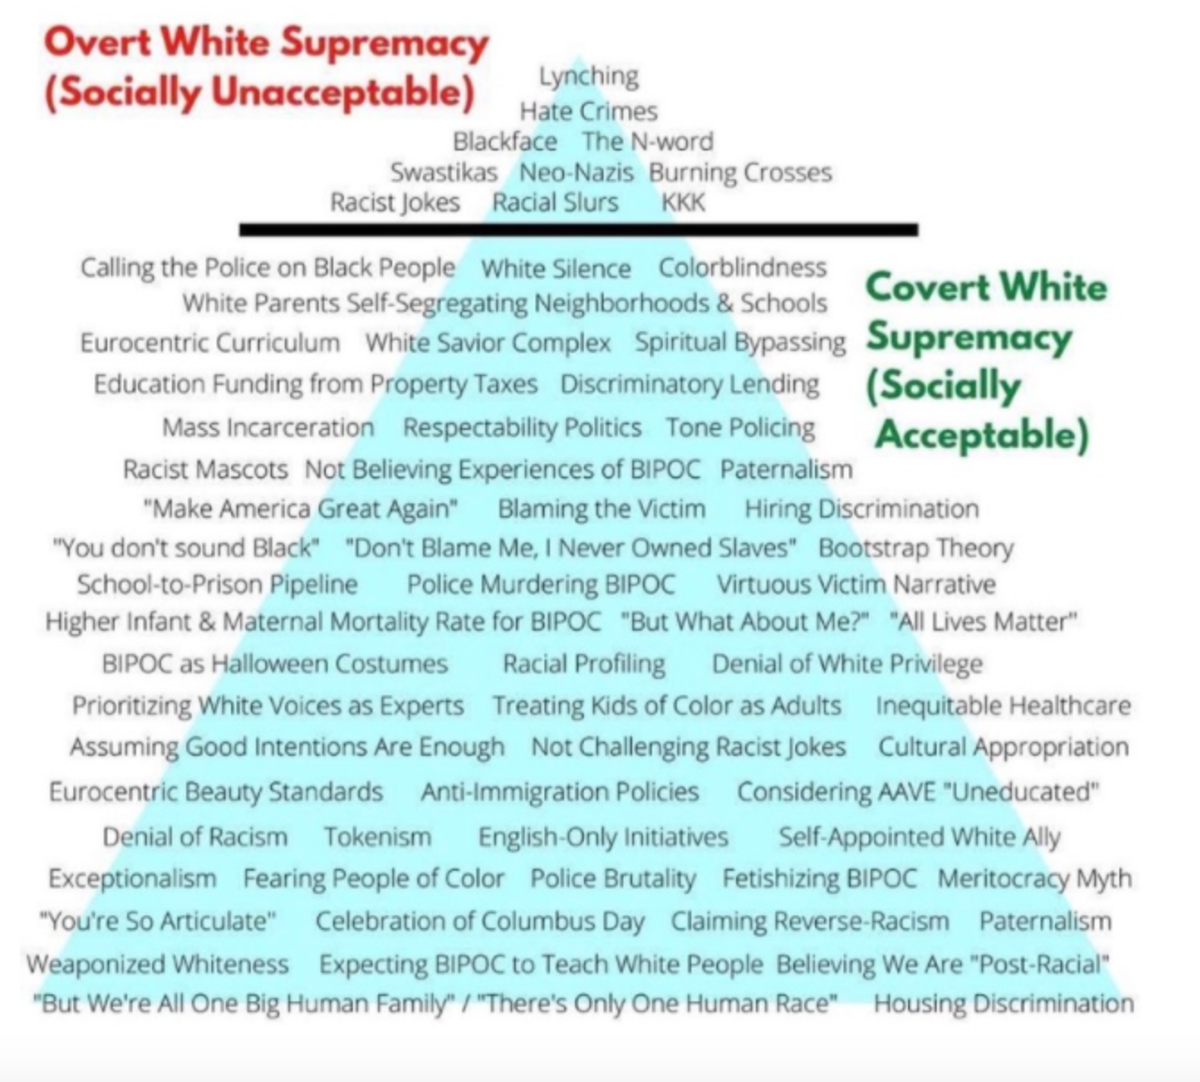 Pyramid depicting "overt white supremacy" and "covert white supremacy" 